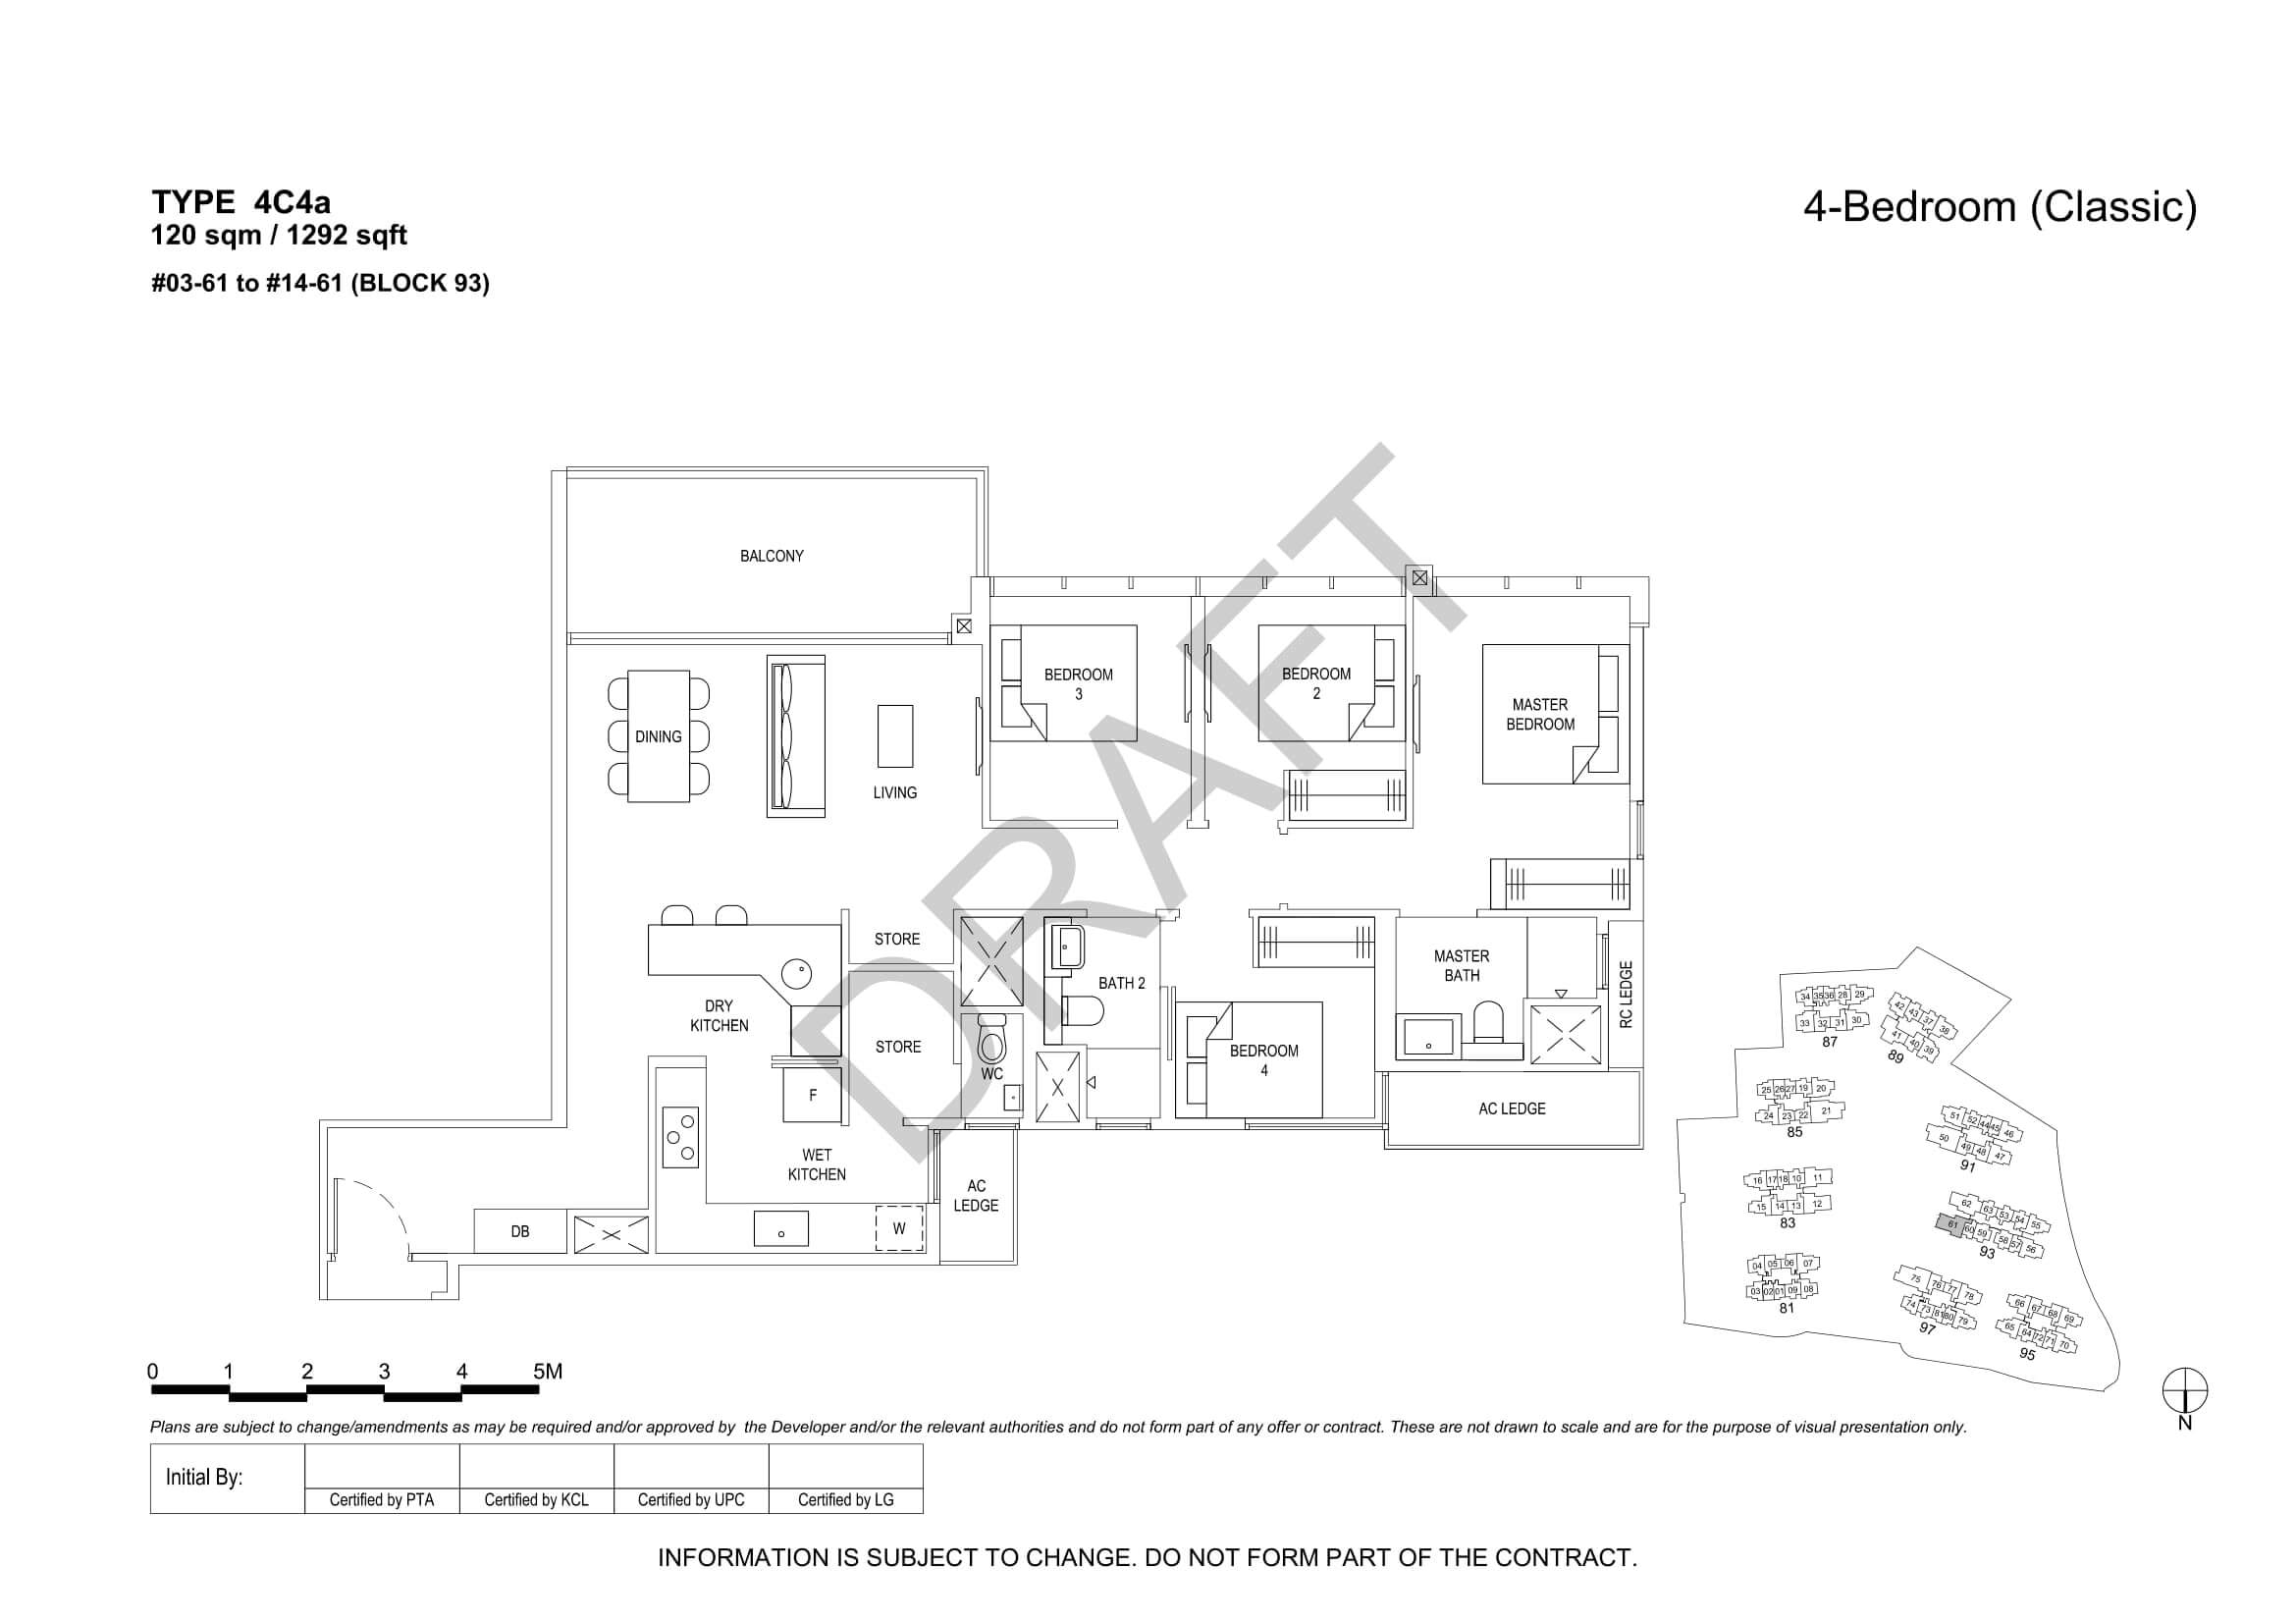 The Florence Residences Floor Plan 4-Bedroom Type 4C4a